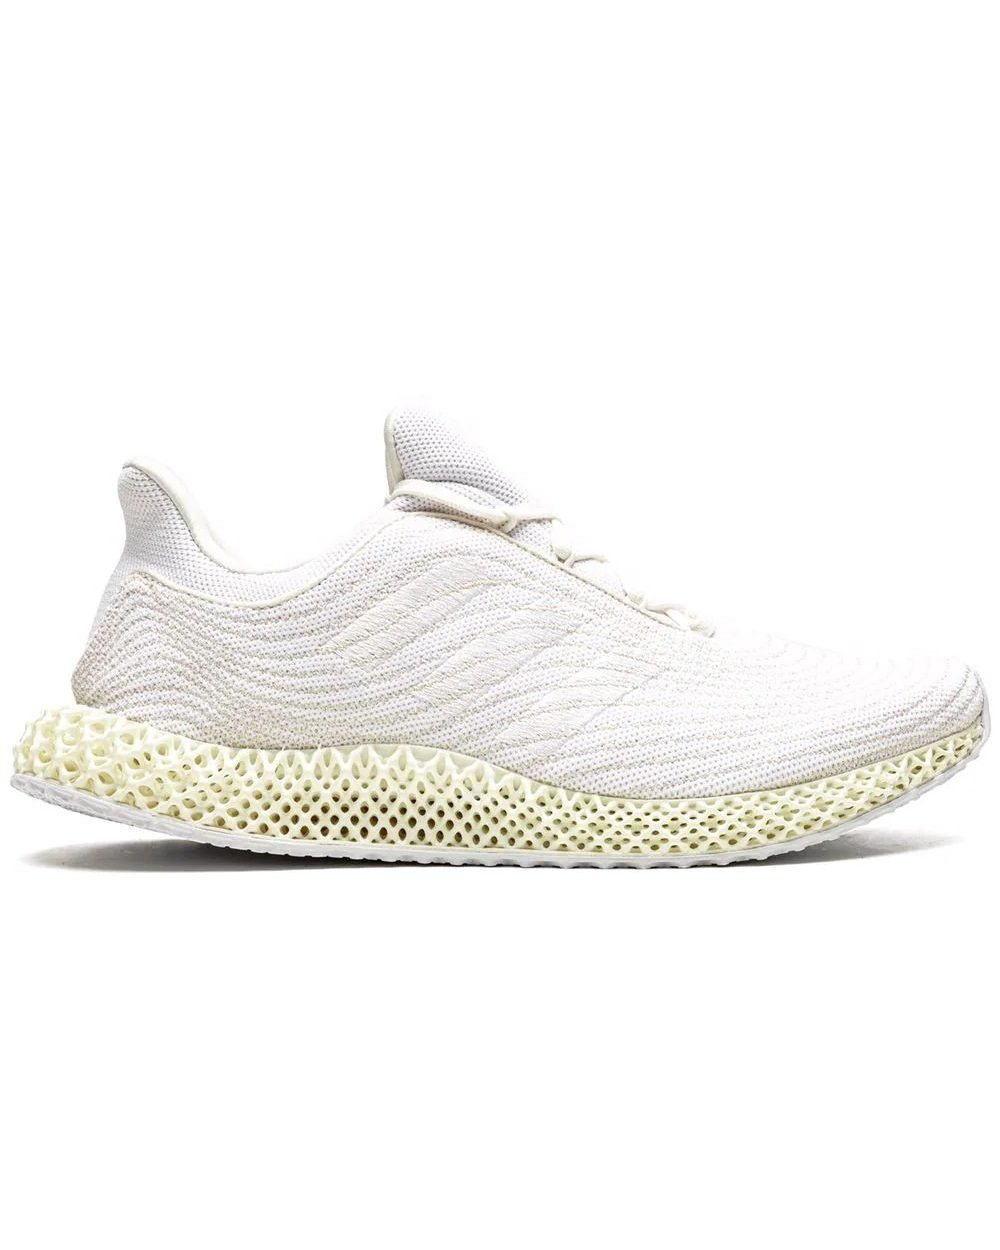 Adidas 4D PARLEY 3D Printed Trainers